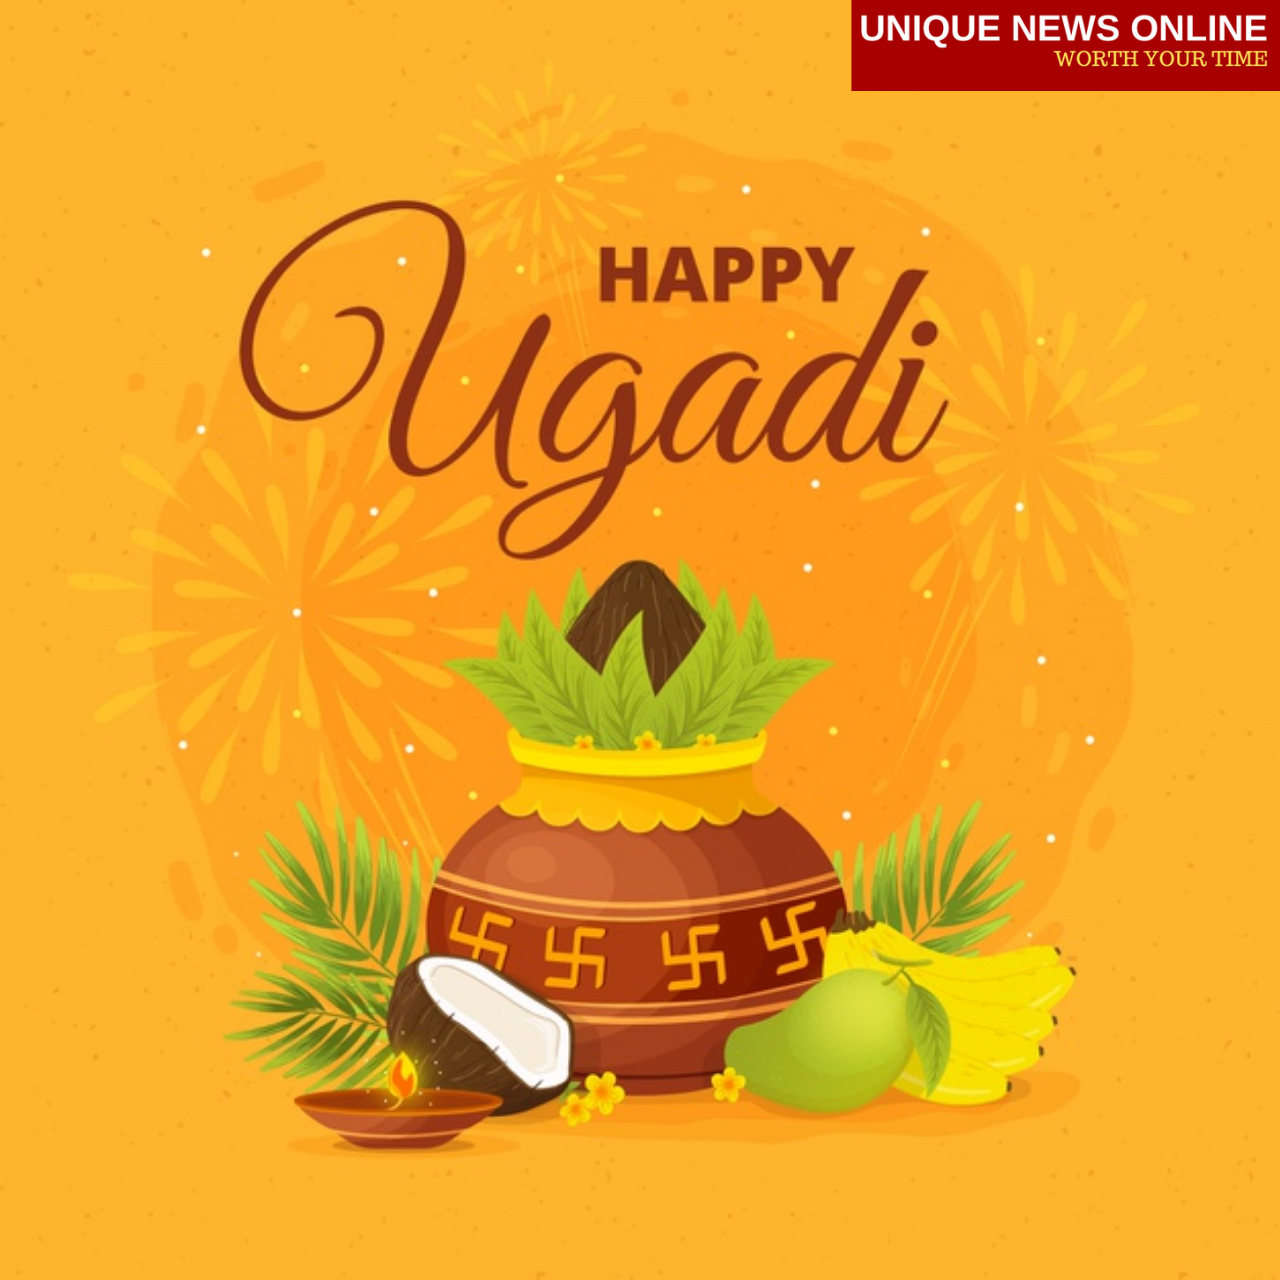 Happy Ugadi 2021 Wishes in Telugu, Images, Greetings, Quotes, and ...